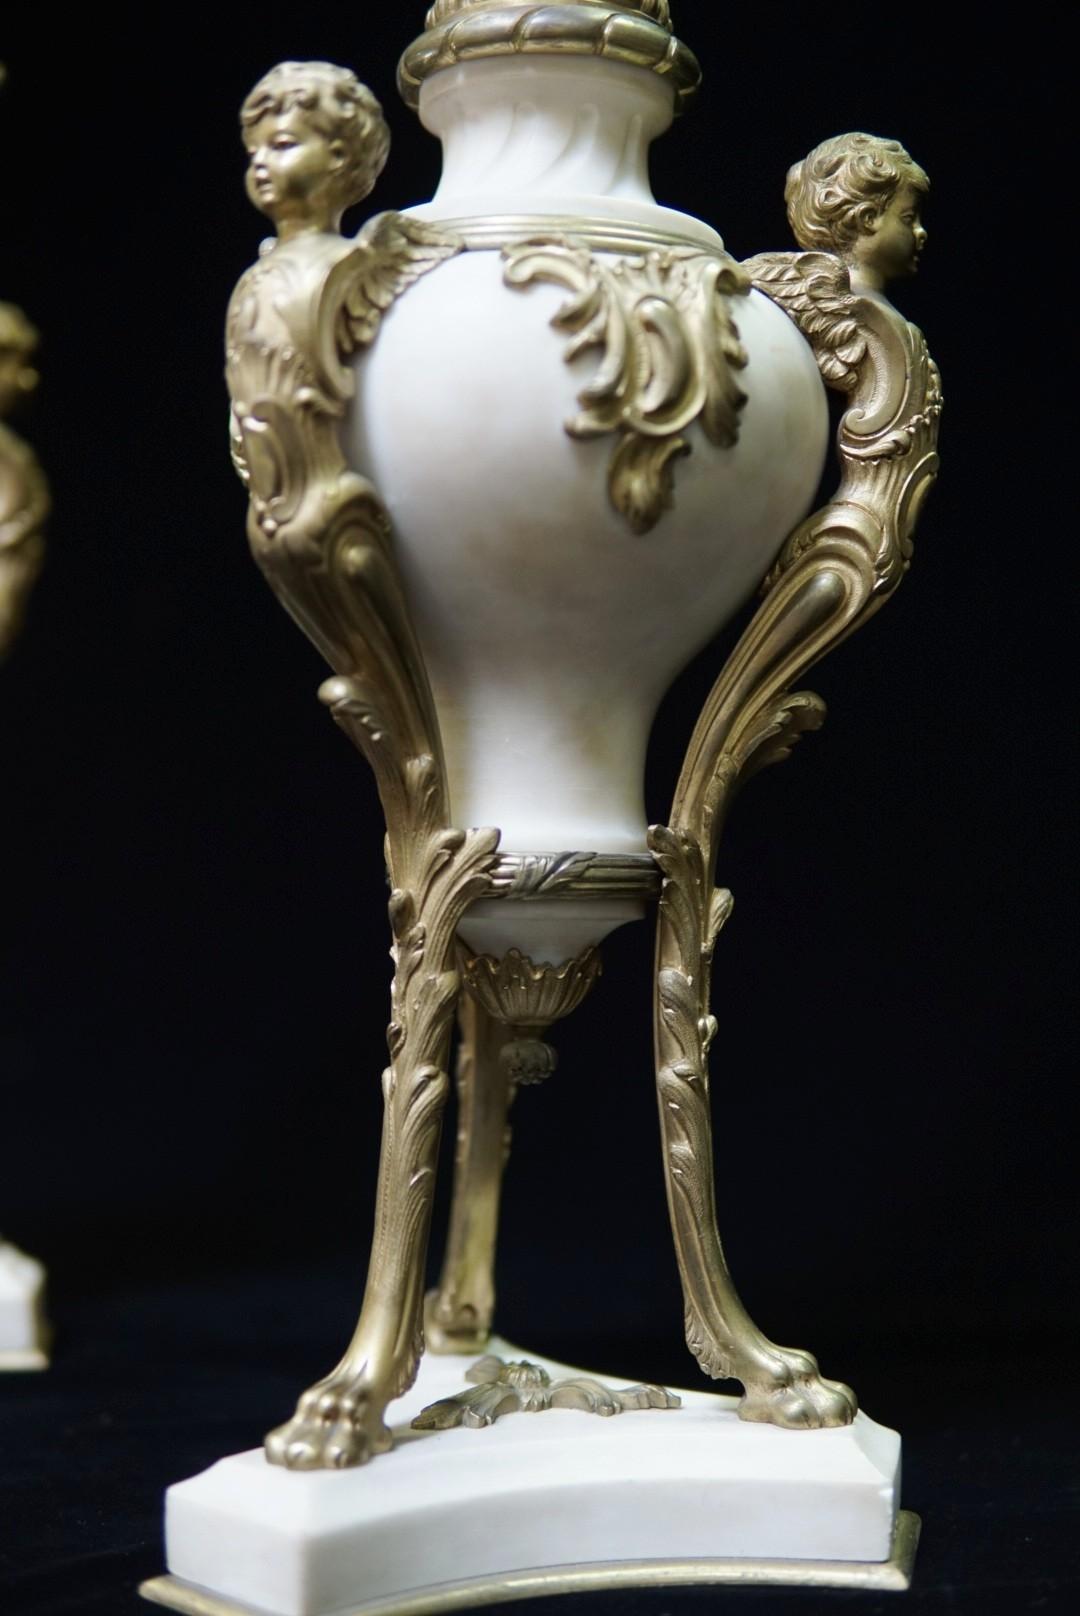 Pair of Ormolu Mounted Marble Candelabras, 19C French In Good Condition For Sale In Cypress, CA